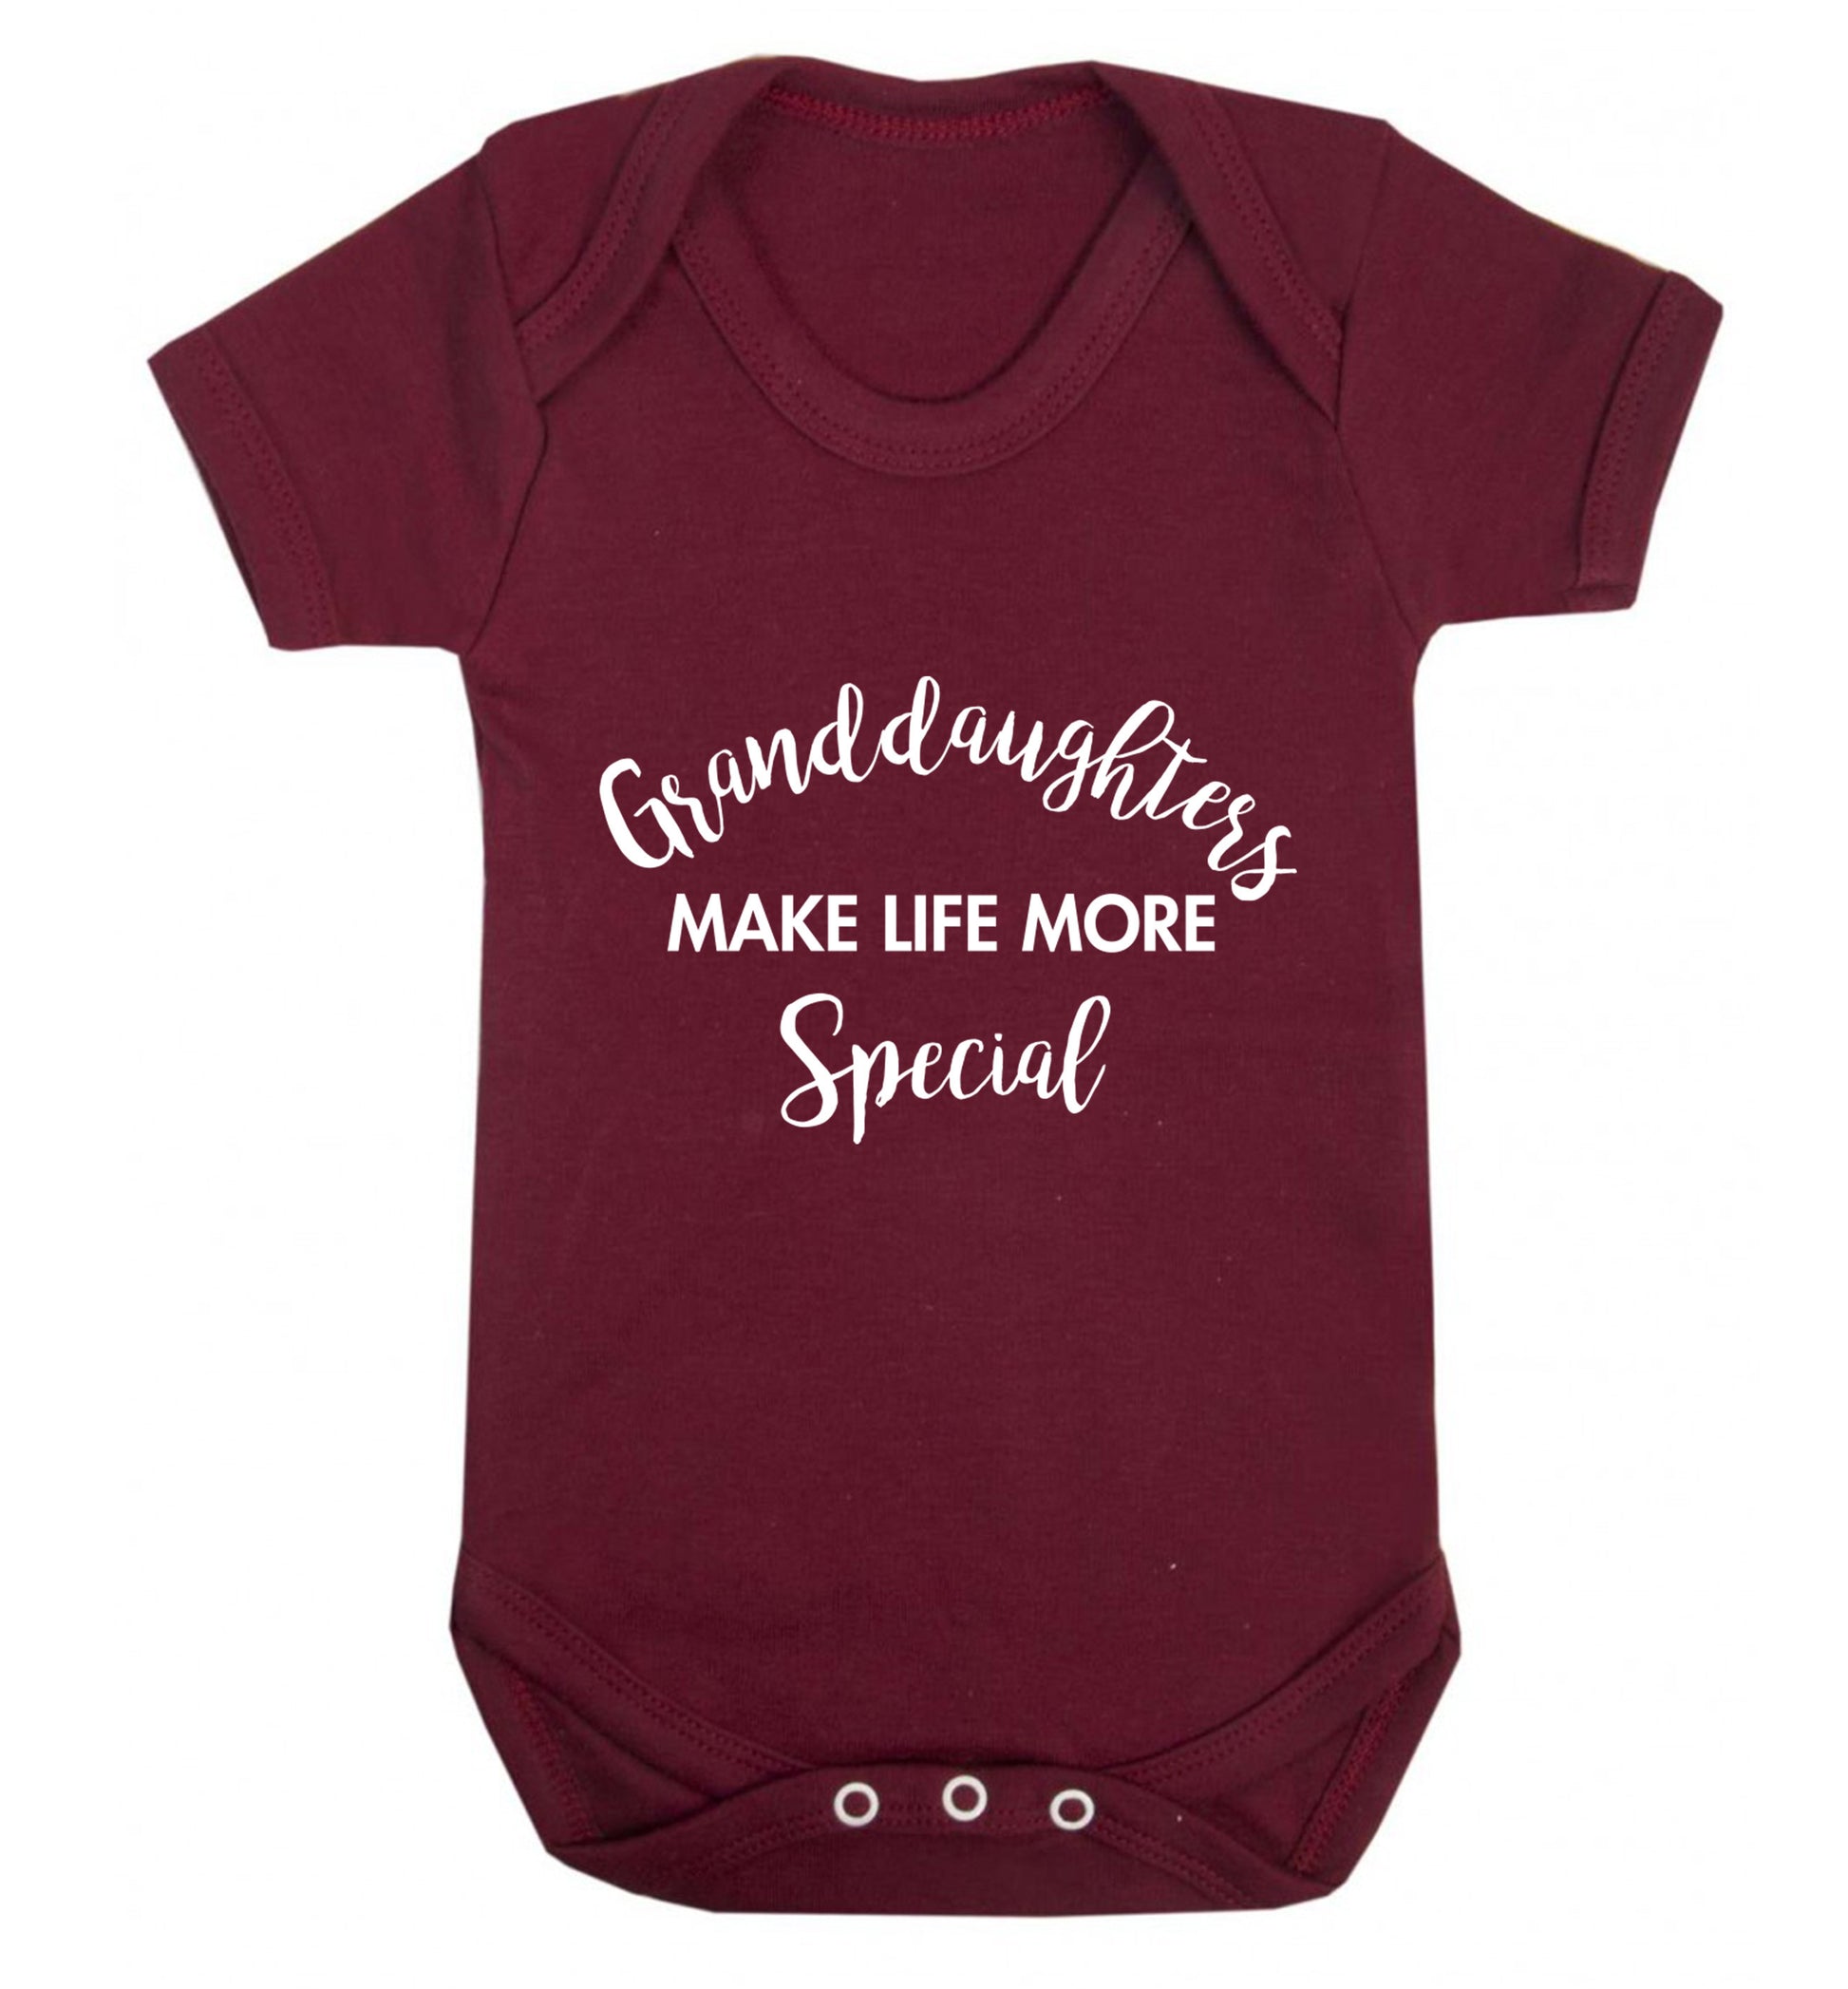 Granddaughters make life more special Baby Vest maroon 18-24 months